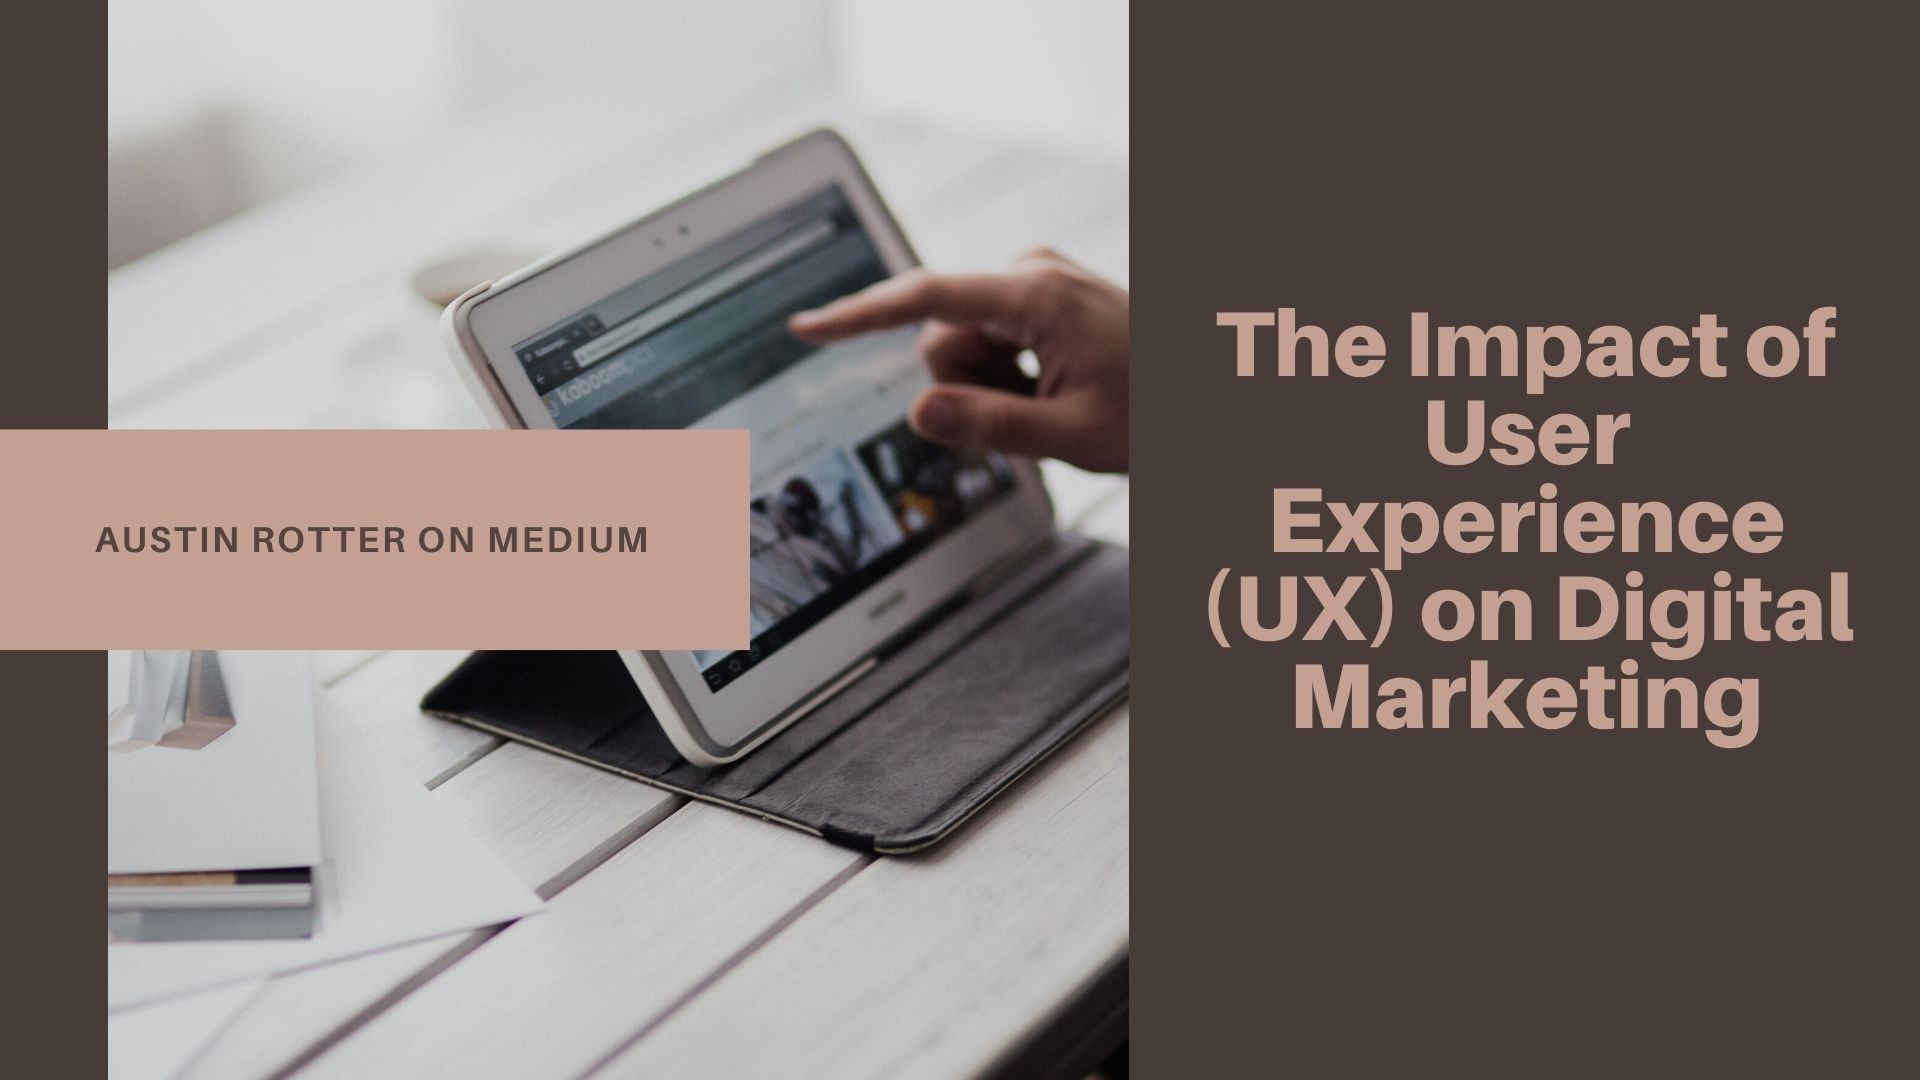 The Impact of
User
Experience
(UX) on Digital
Marketing